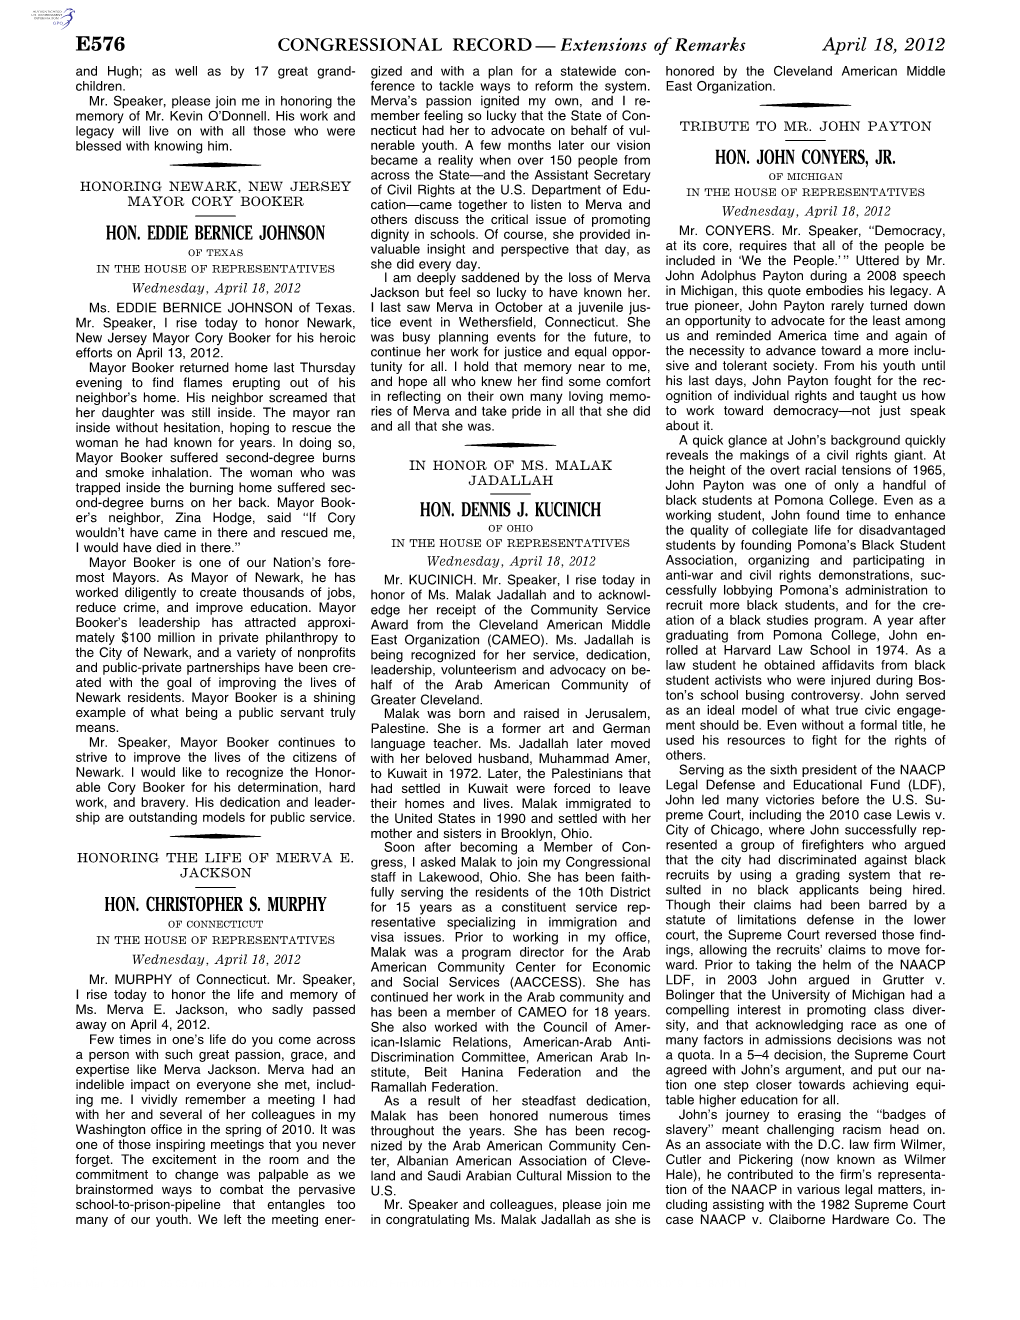 CONGRESSIONAL RECORD— Extensions of Remarks E576 HON